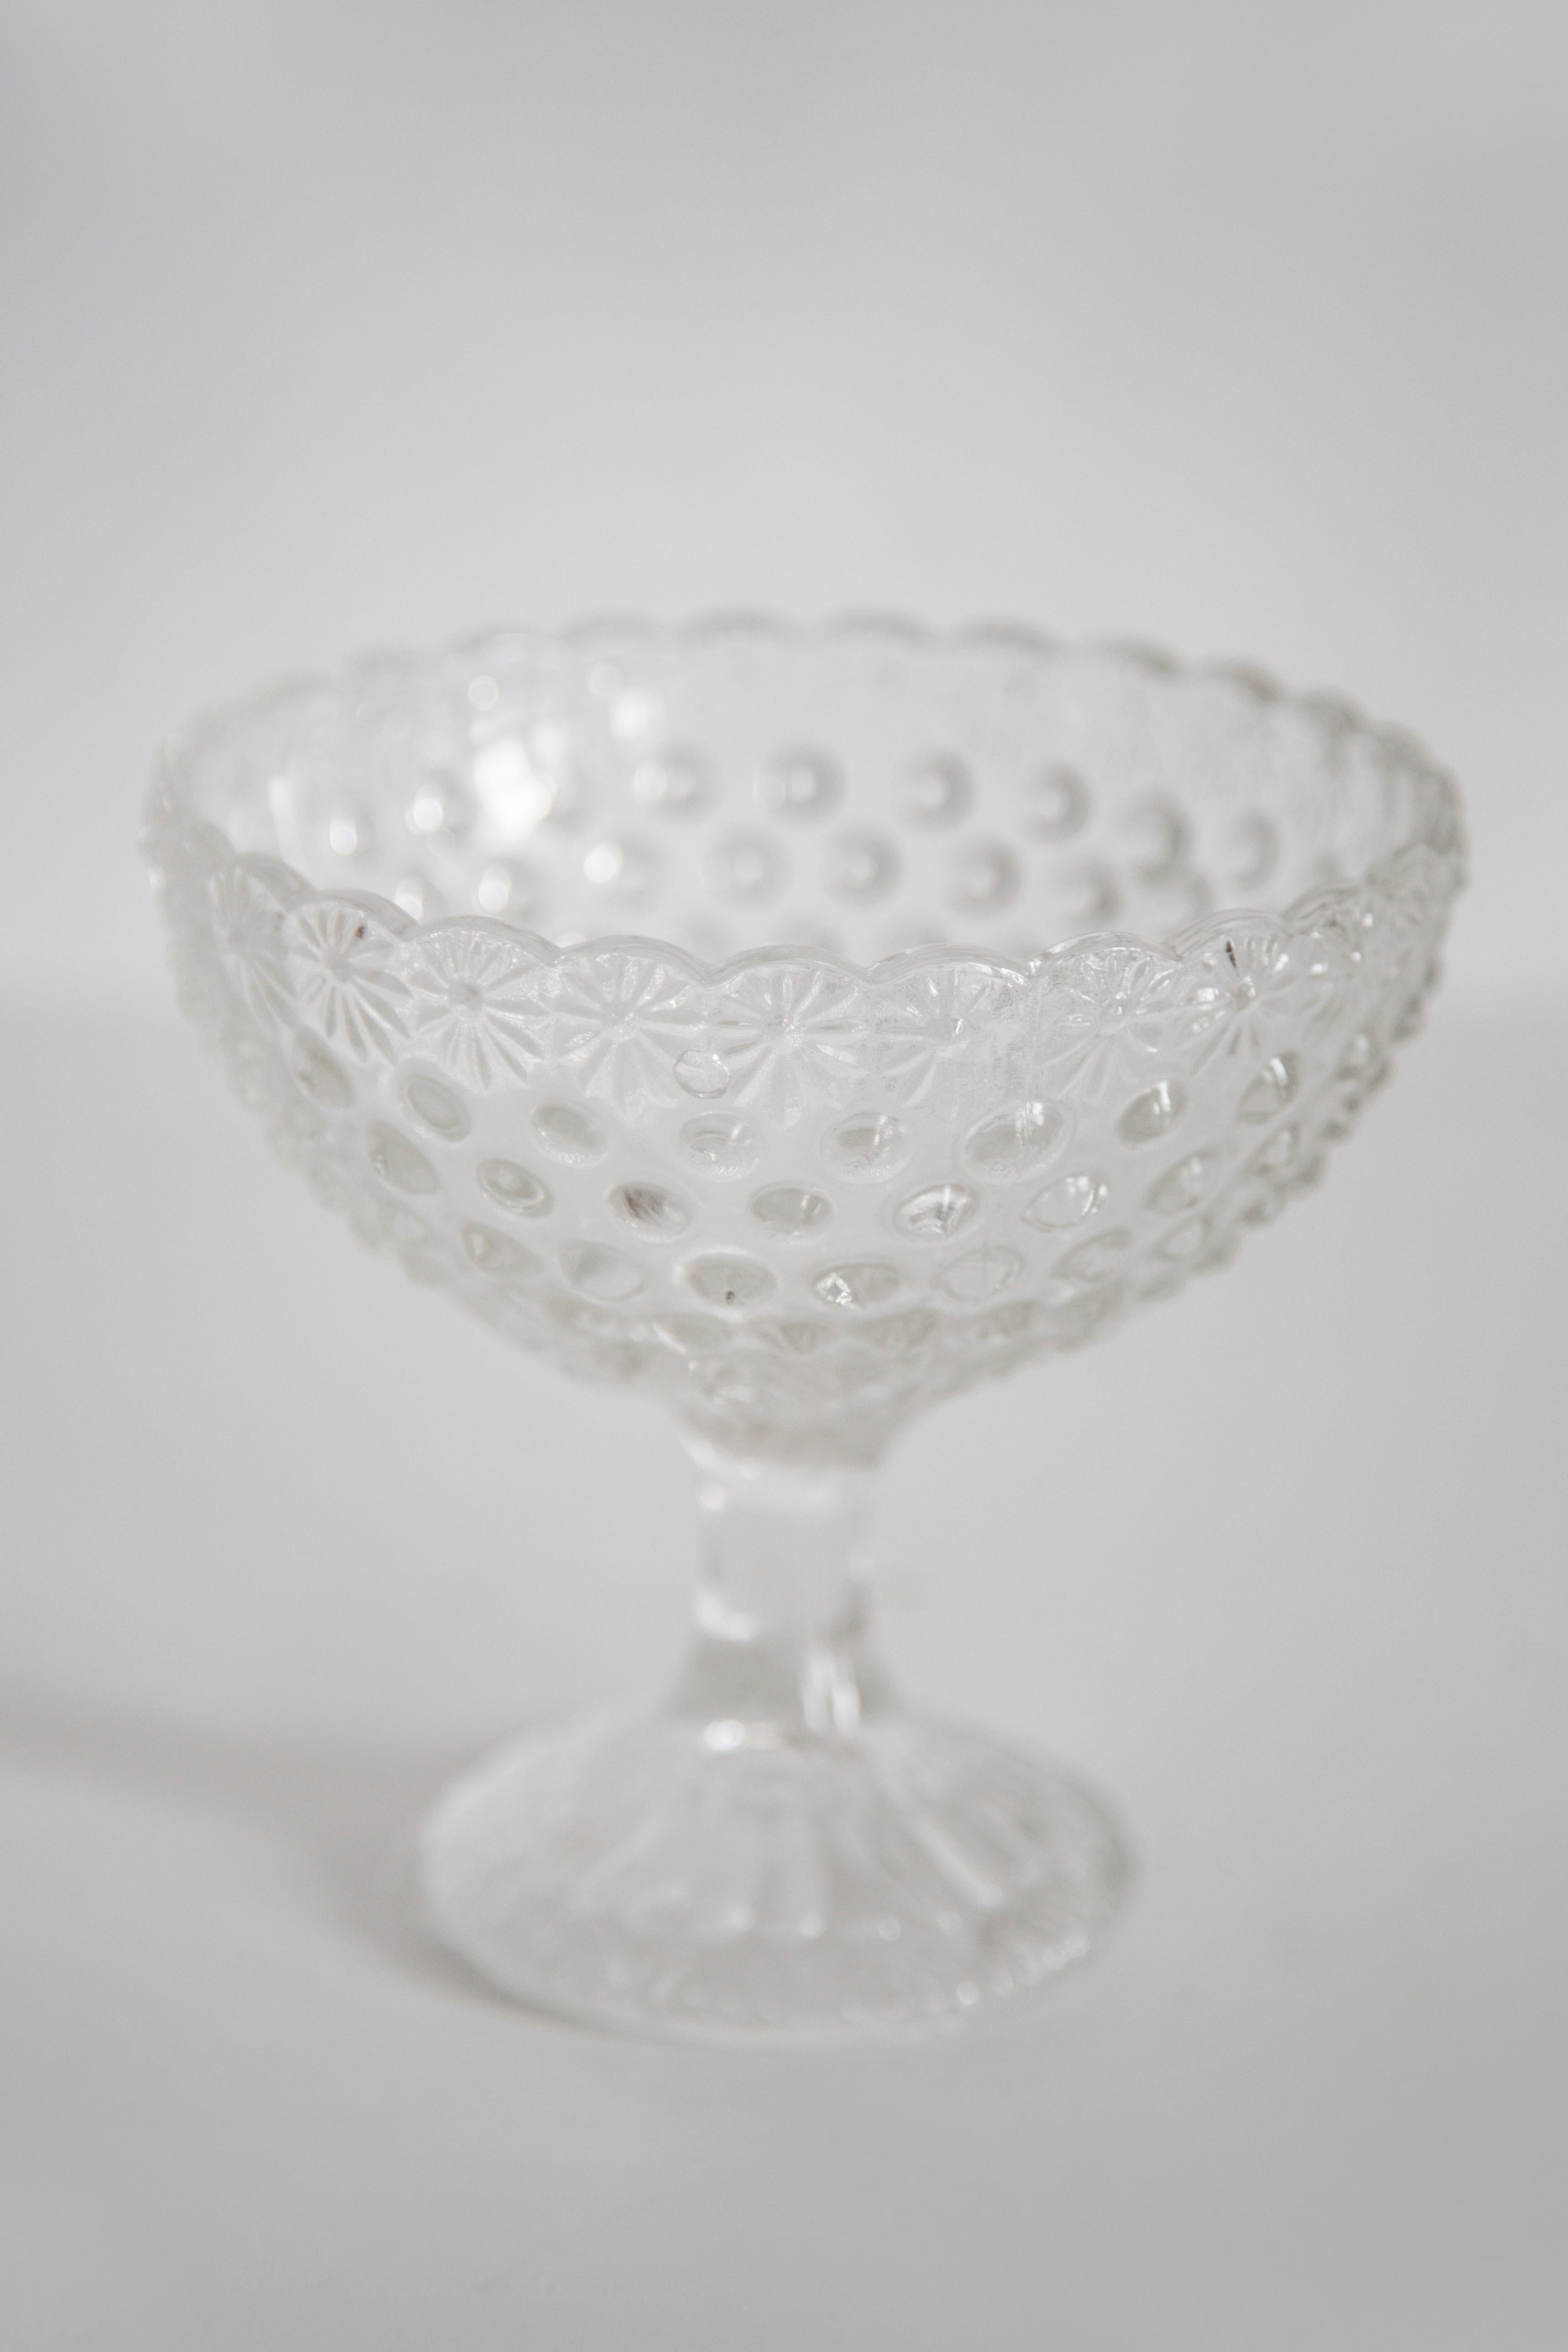 20th Century Mid Century Vintage Transparent Glass Sugar or Fruit Bowl, Italy, 1960s For Sale